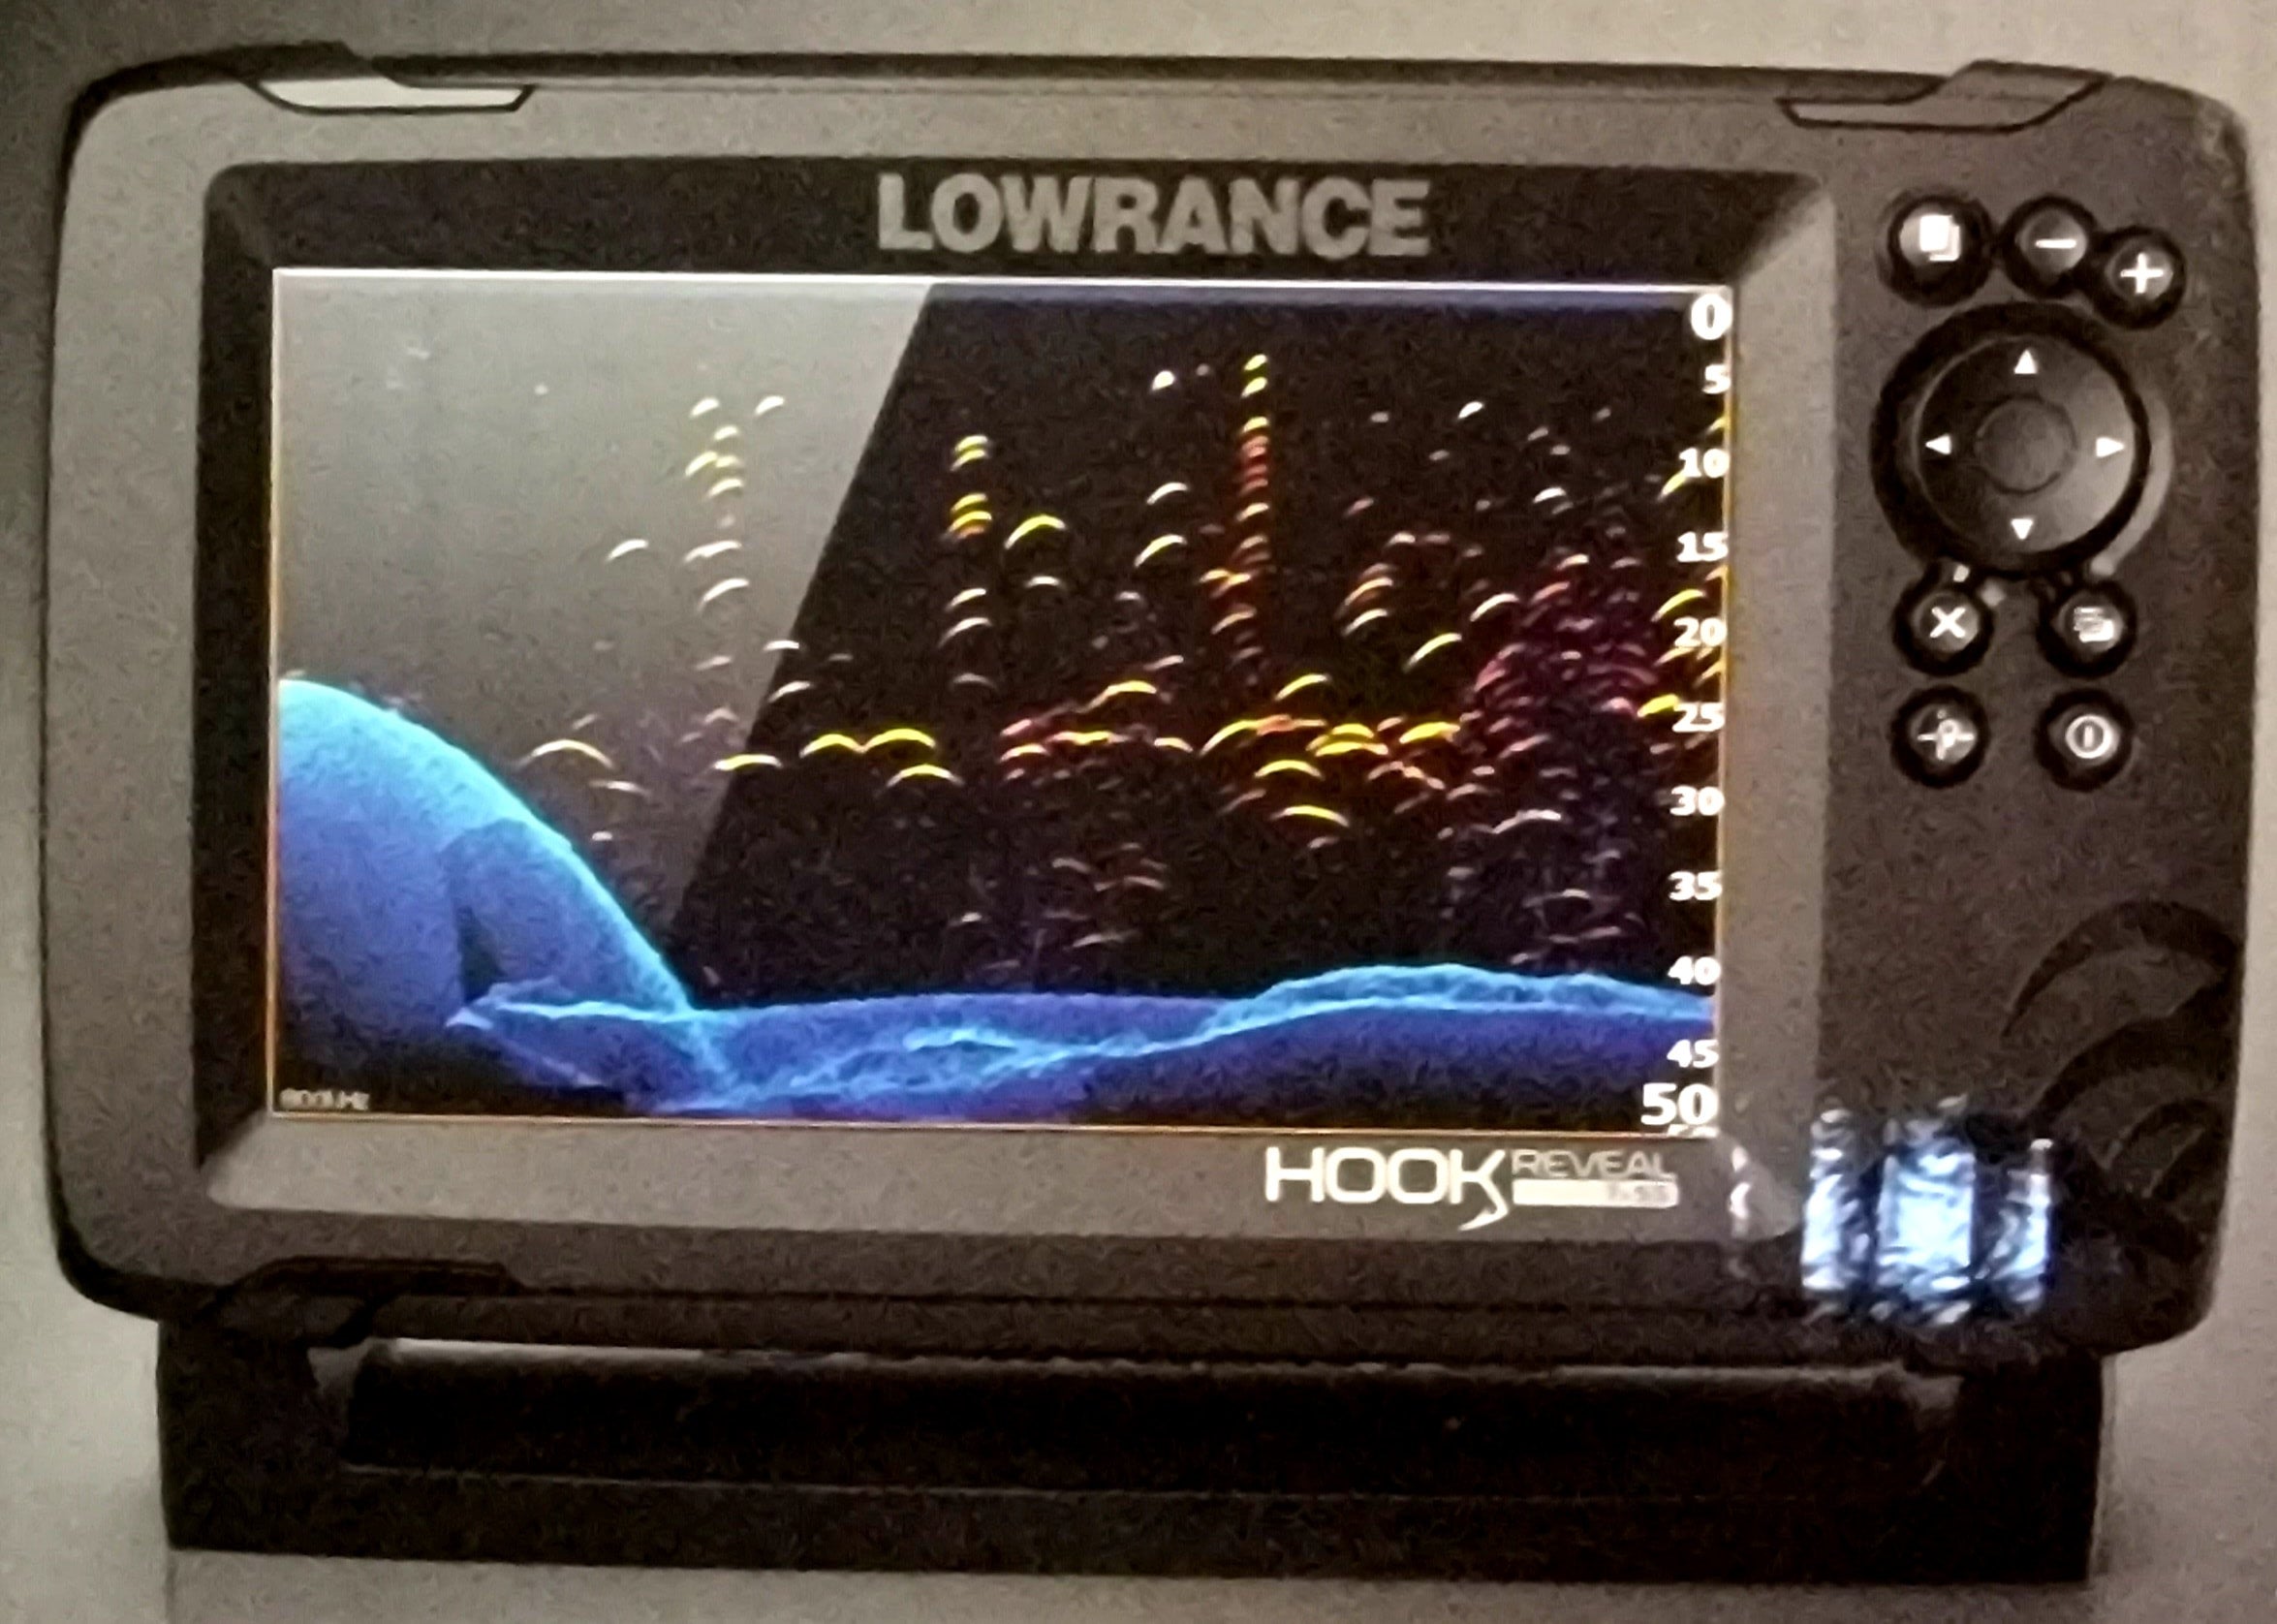 Lowrance Hook Reveal 7x with SplitShot / High Chirp Transducer + Extras  (New - Open Box)